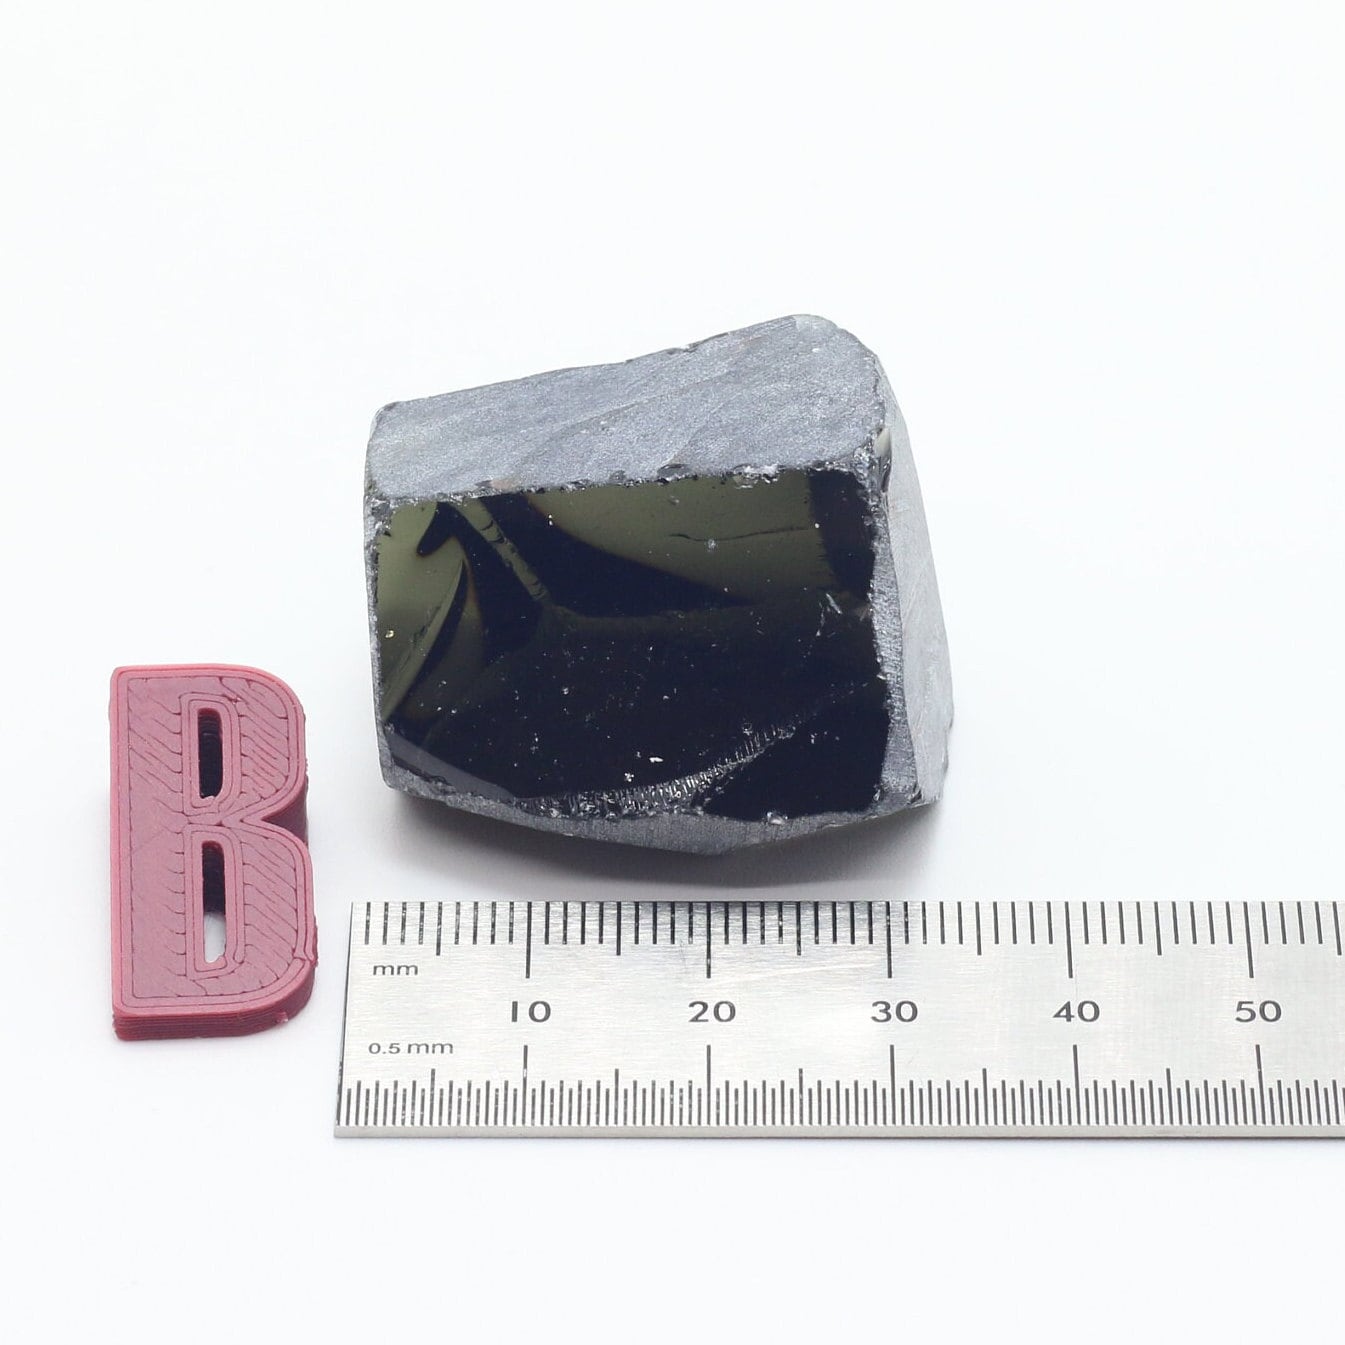 Smoky Quartz Nanosital Synthetic Lab Created Faceting Rough for Gem Cutting - #A-4235 - Various Sizes